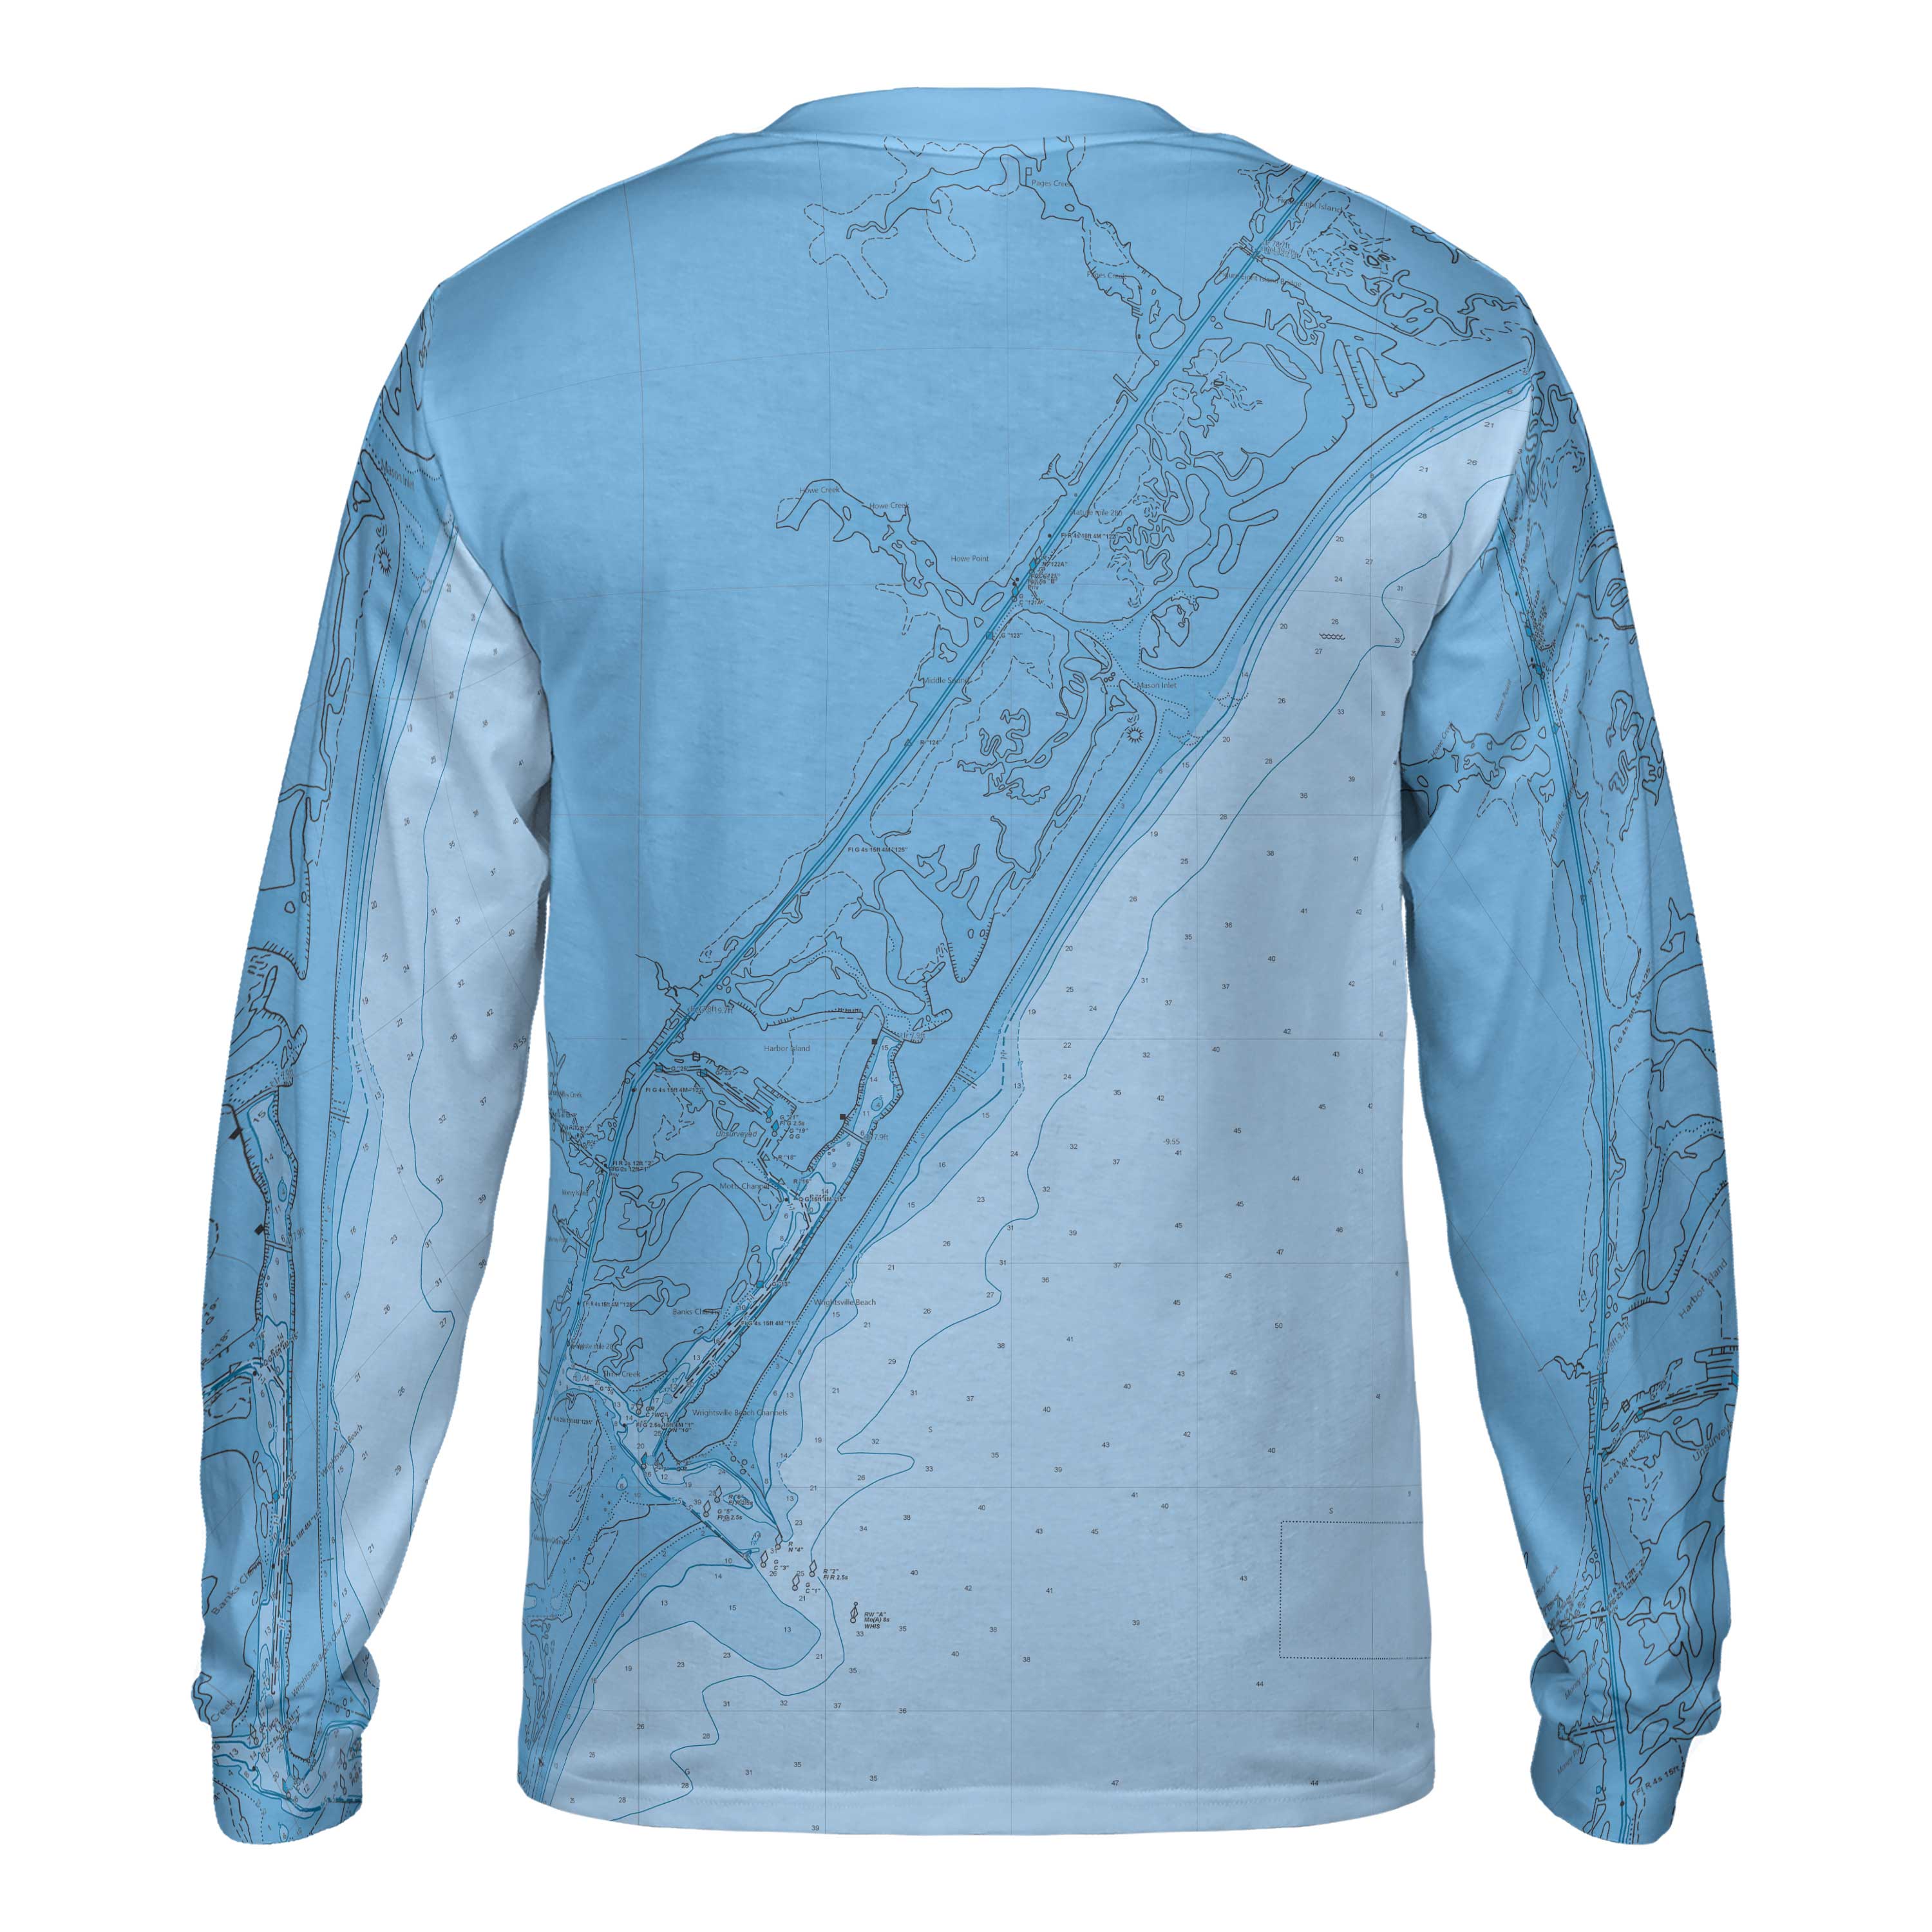 The Wrightsville Beach Blues Long Sleeve Performance Tee